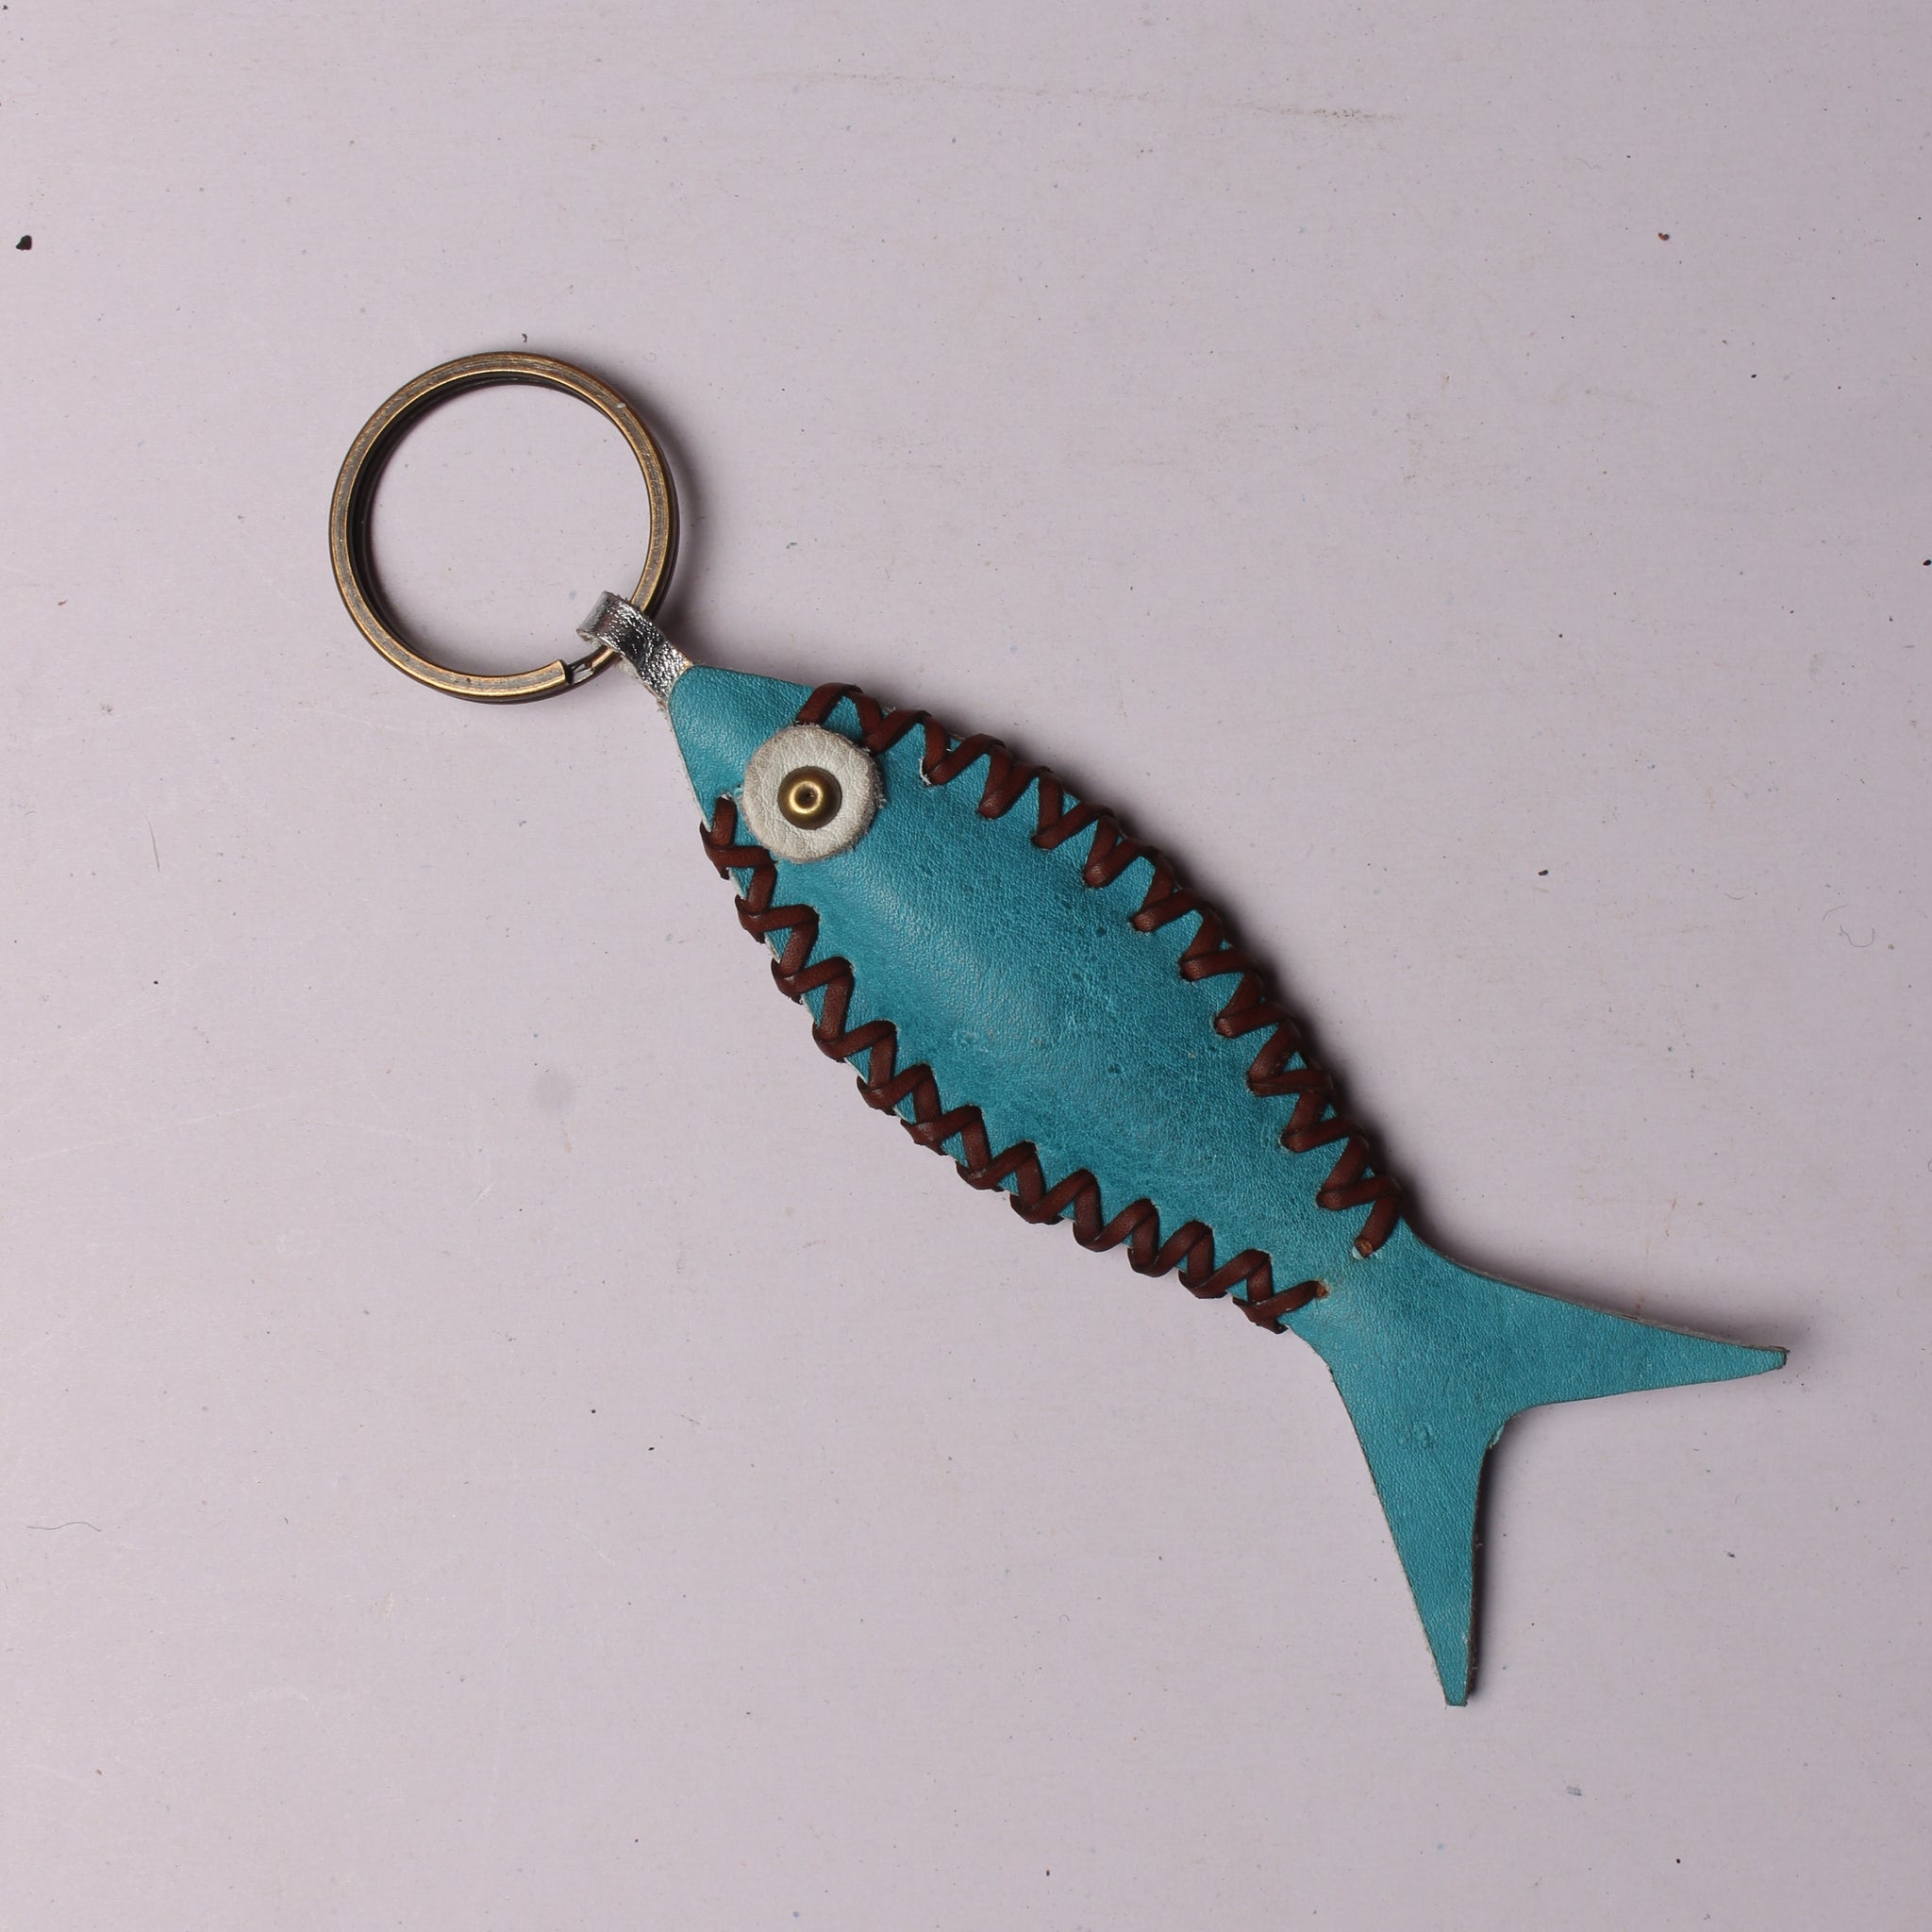 Nautical Chic: Handcrafted Leather Fish-Shaped Keyring with Stylish Side Stitch